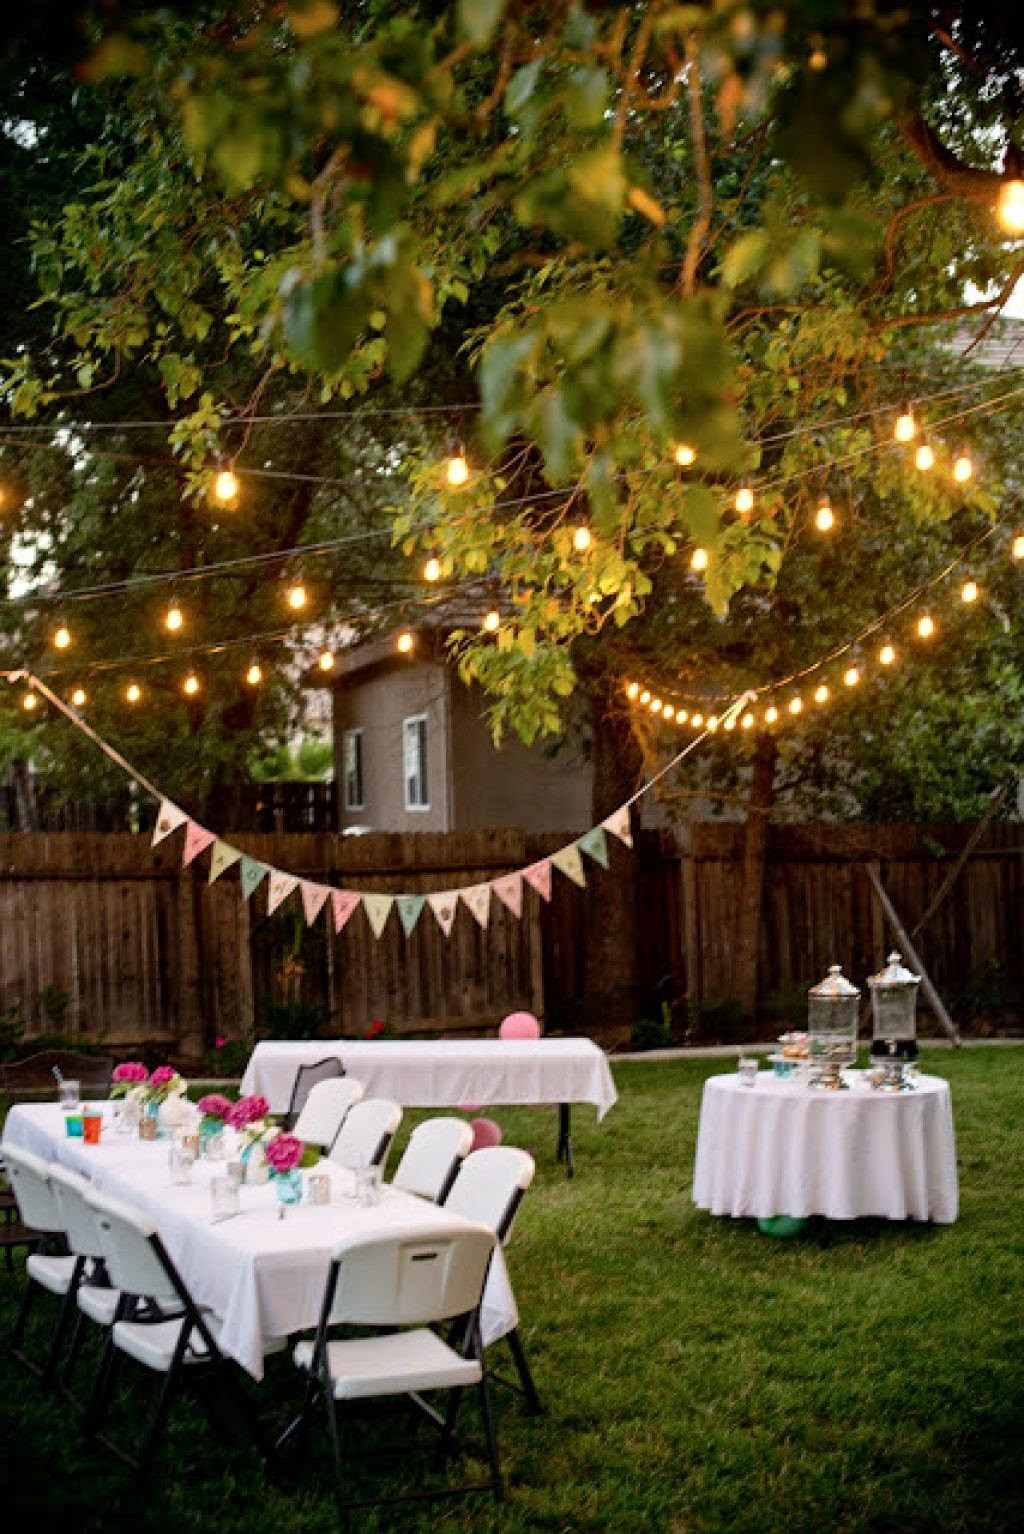 Backyard Birthday Party Decorating Ideas
 Enjoy a year end party in the backyard